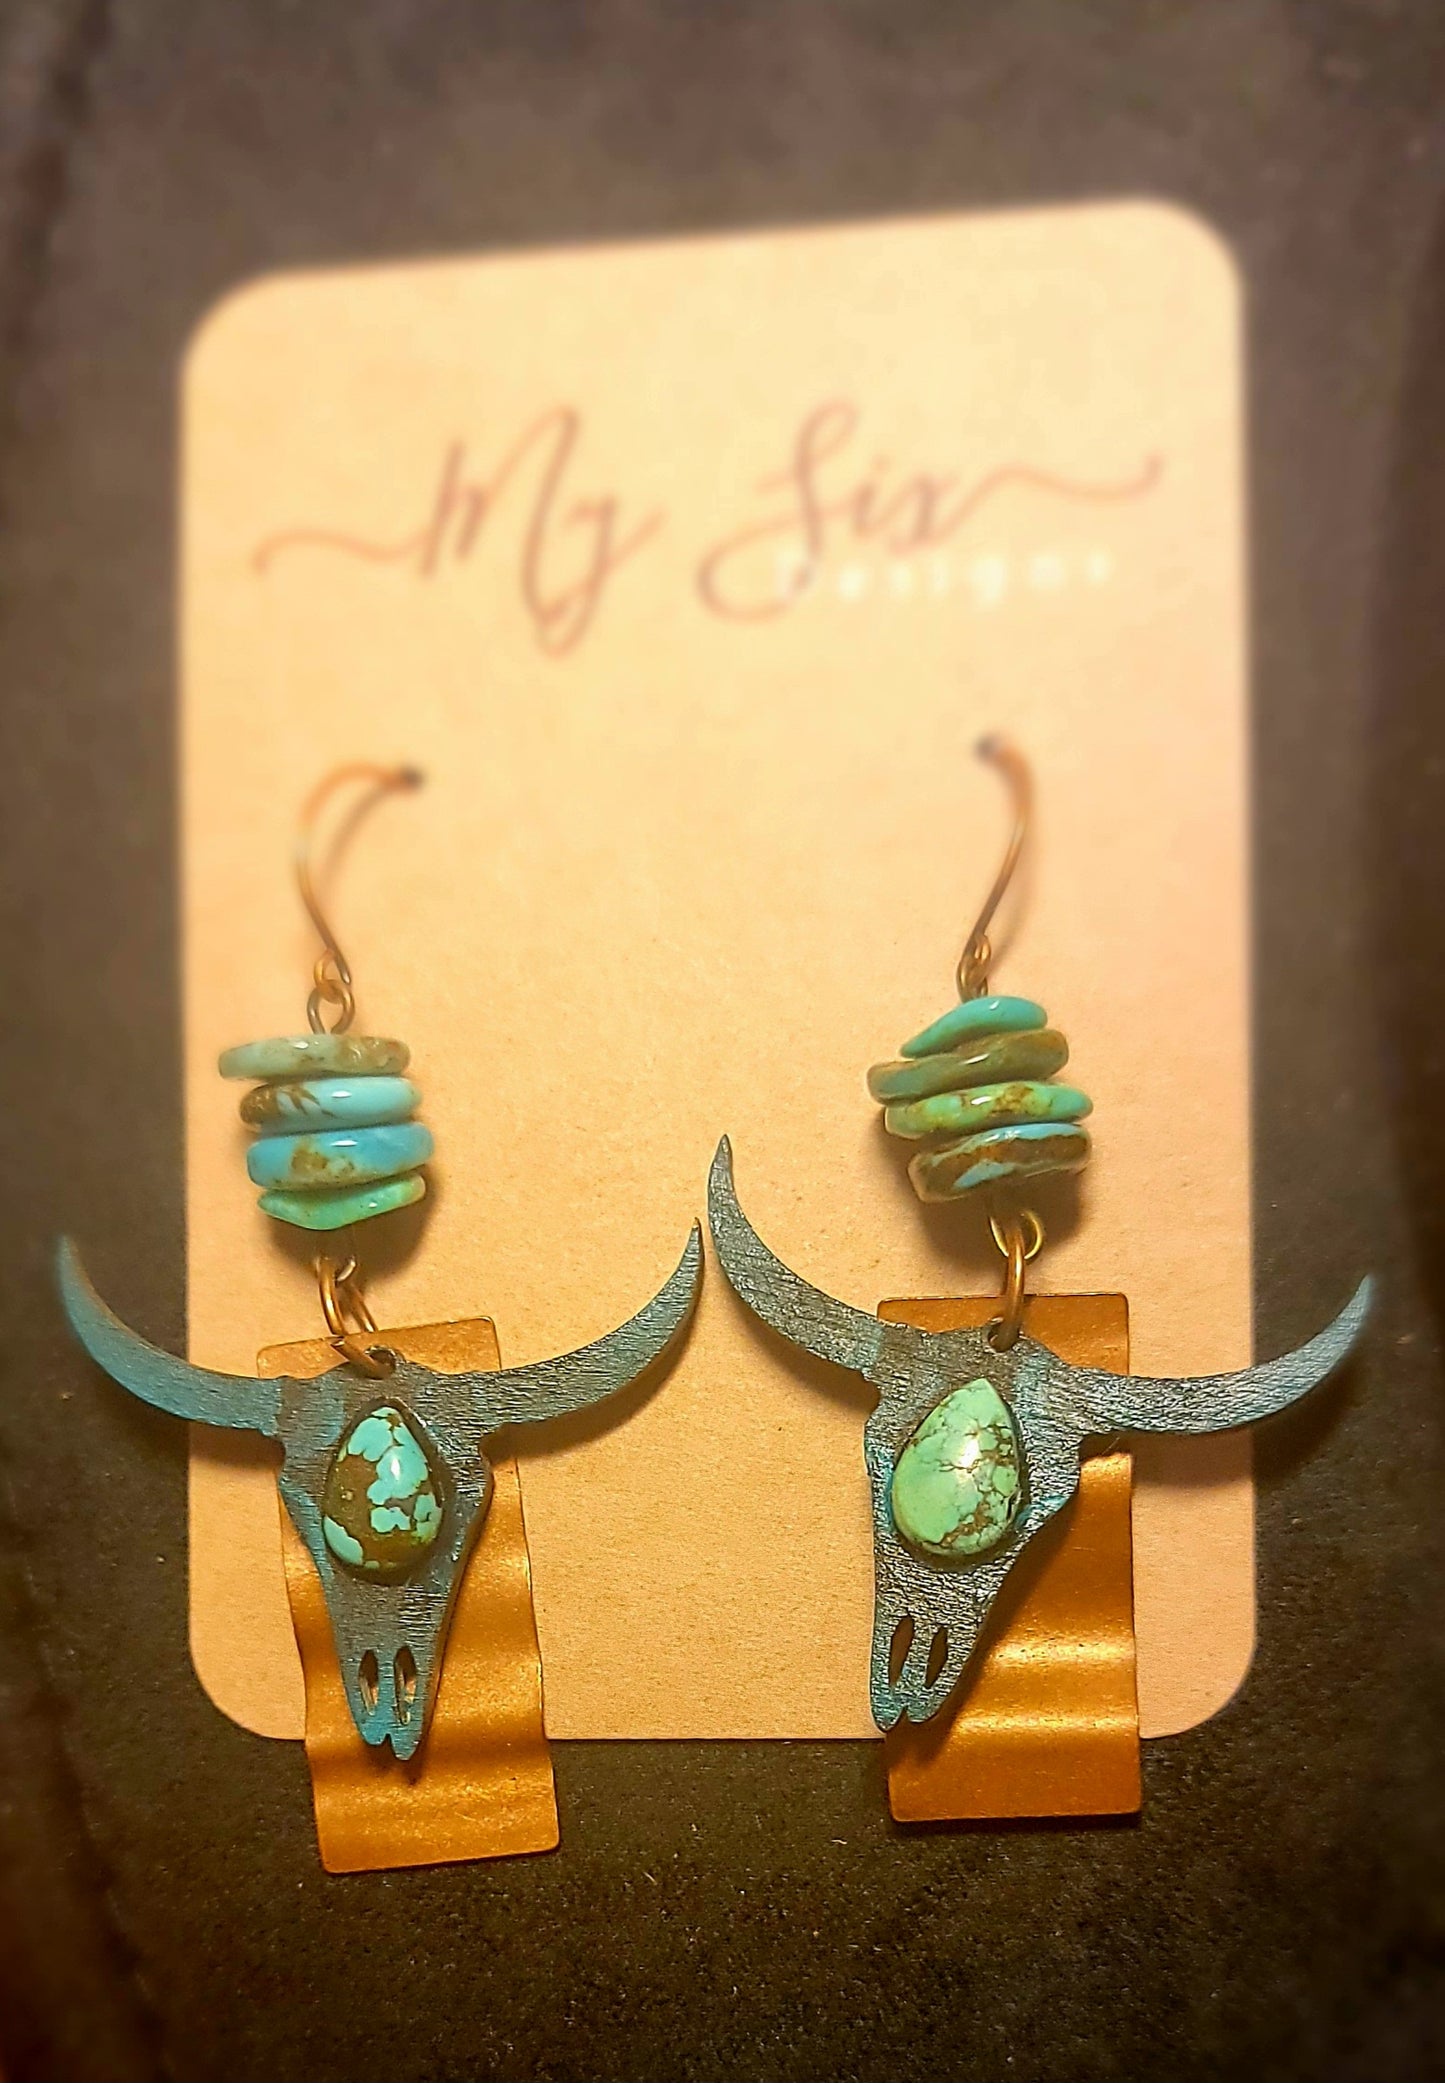 Earrings - Hand Painted Wood with Turquoise and Copper Accents